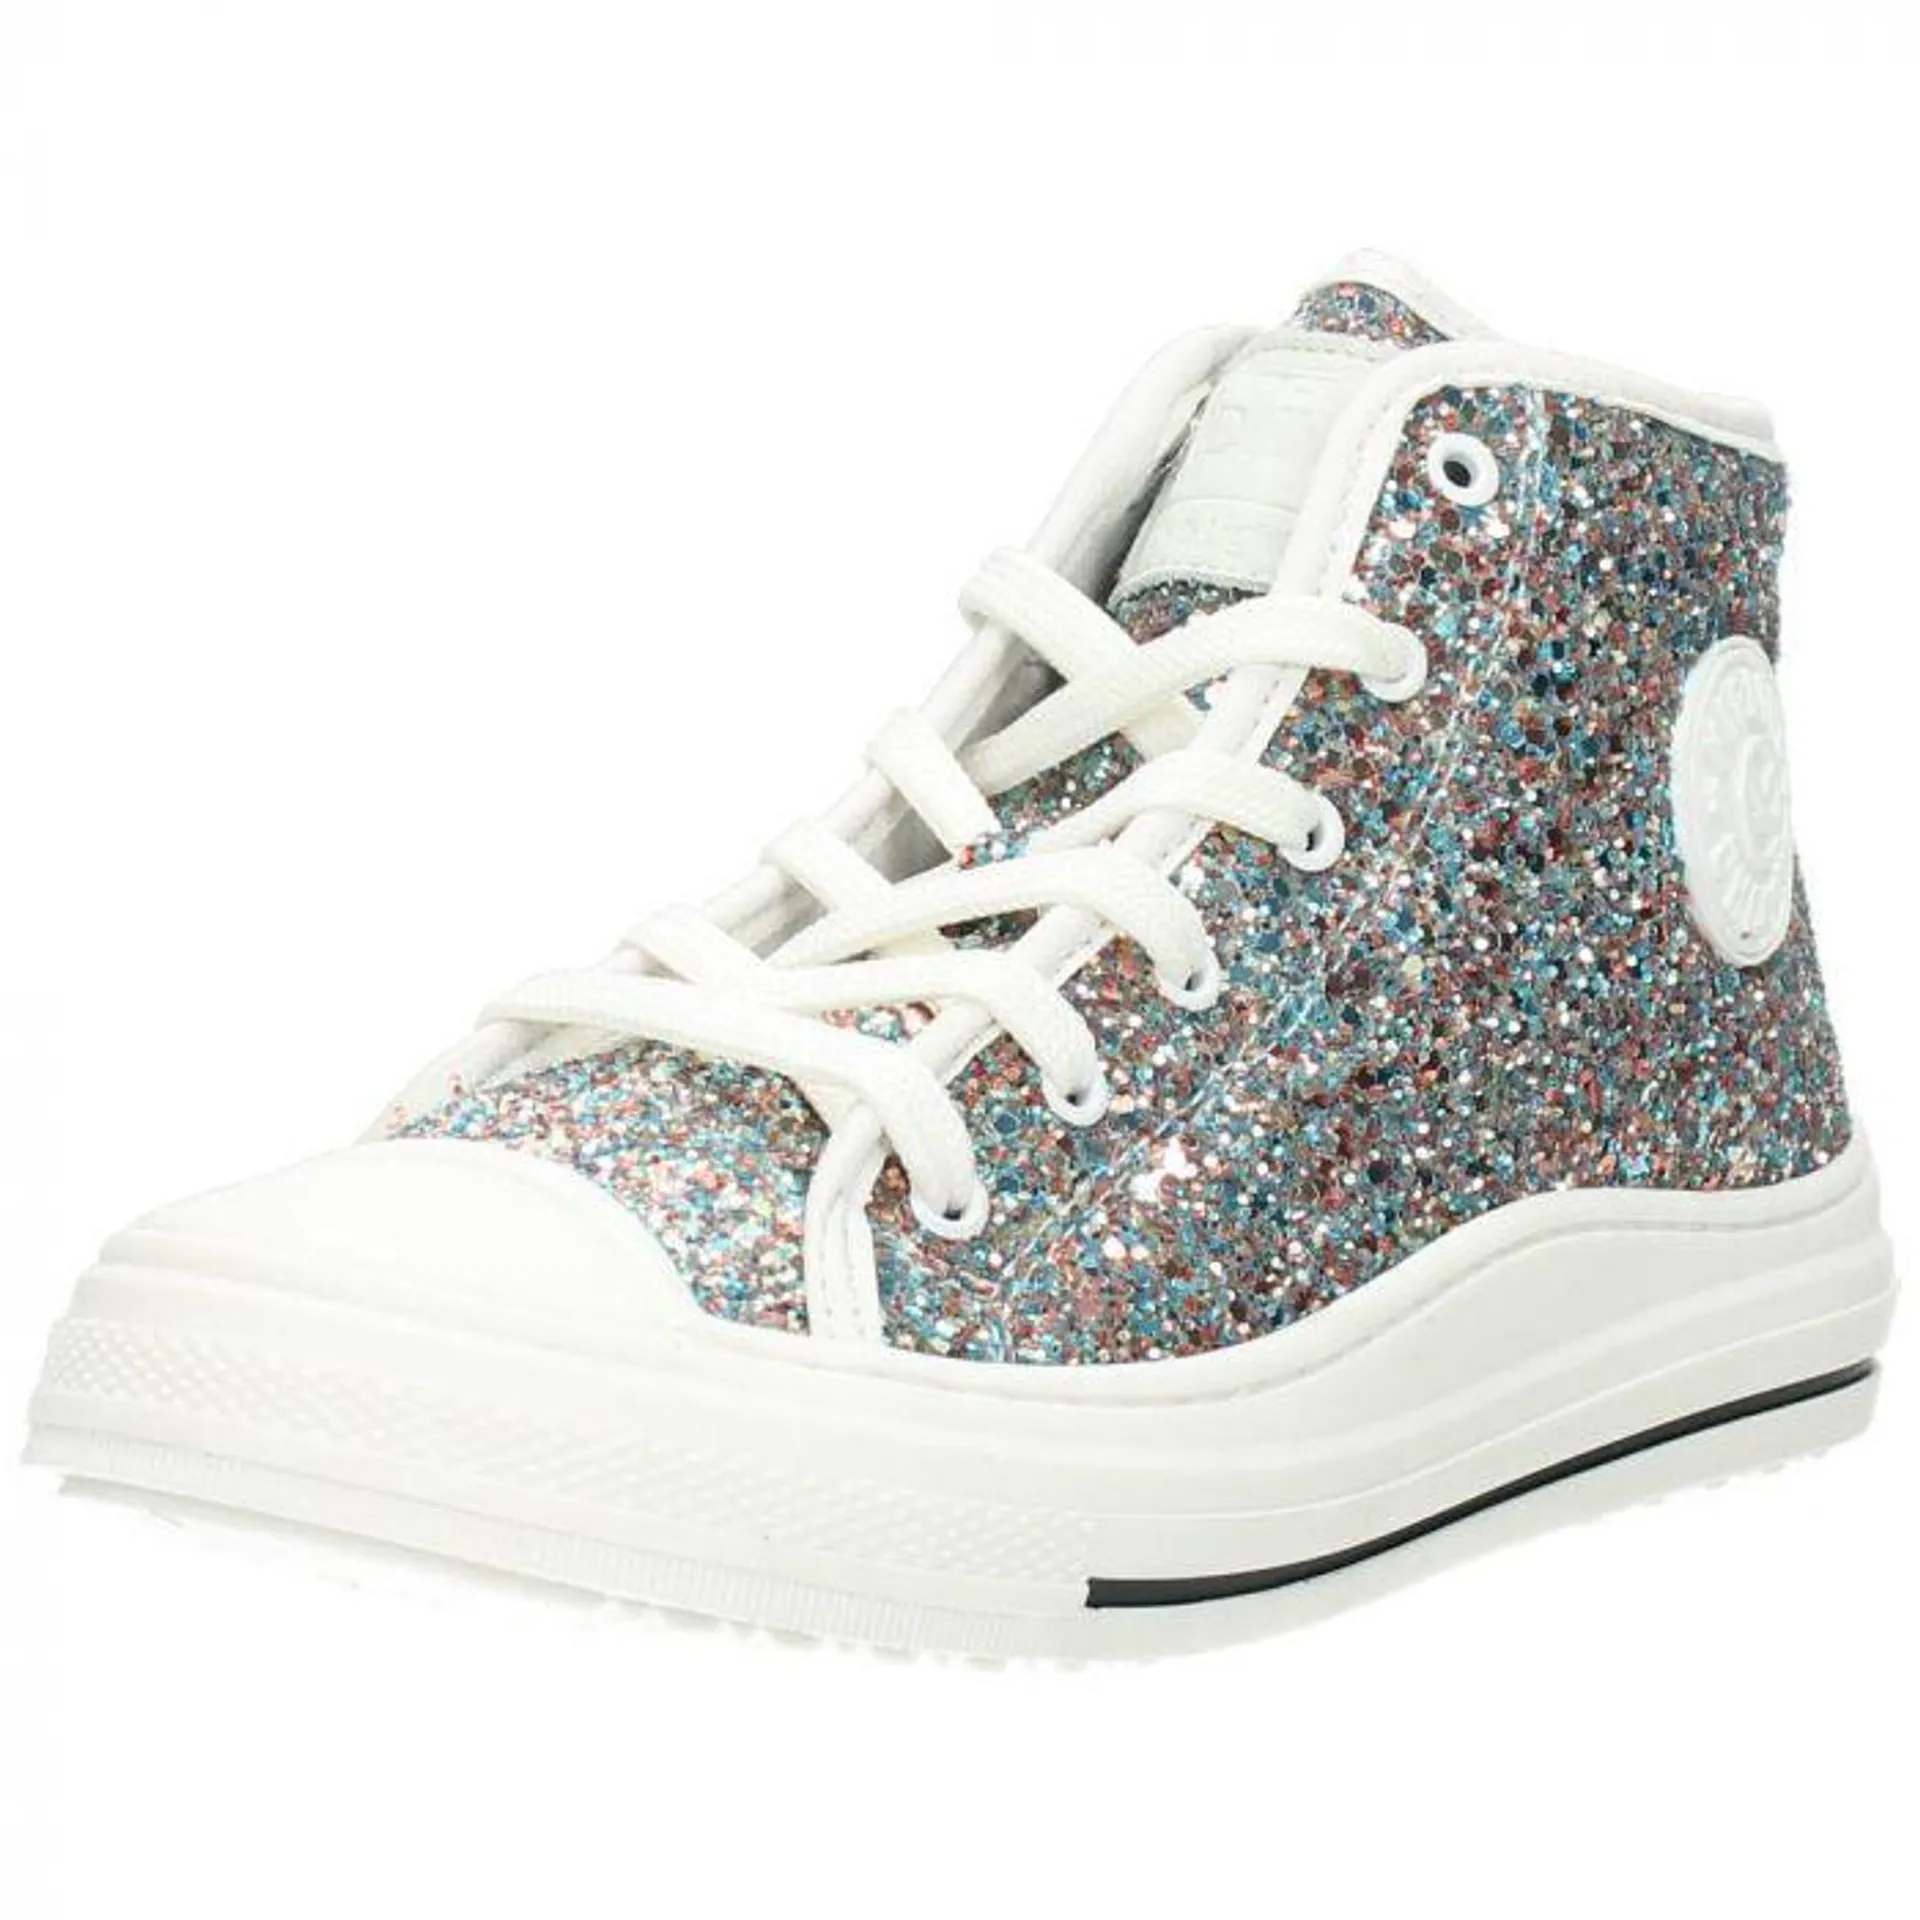 WEB ONLY - Glitter sneakers